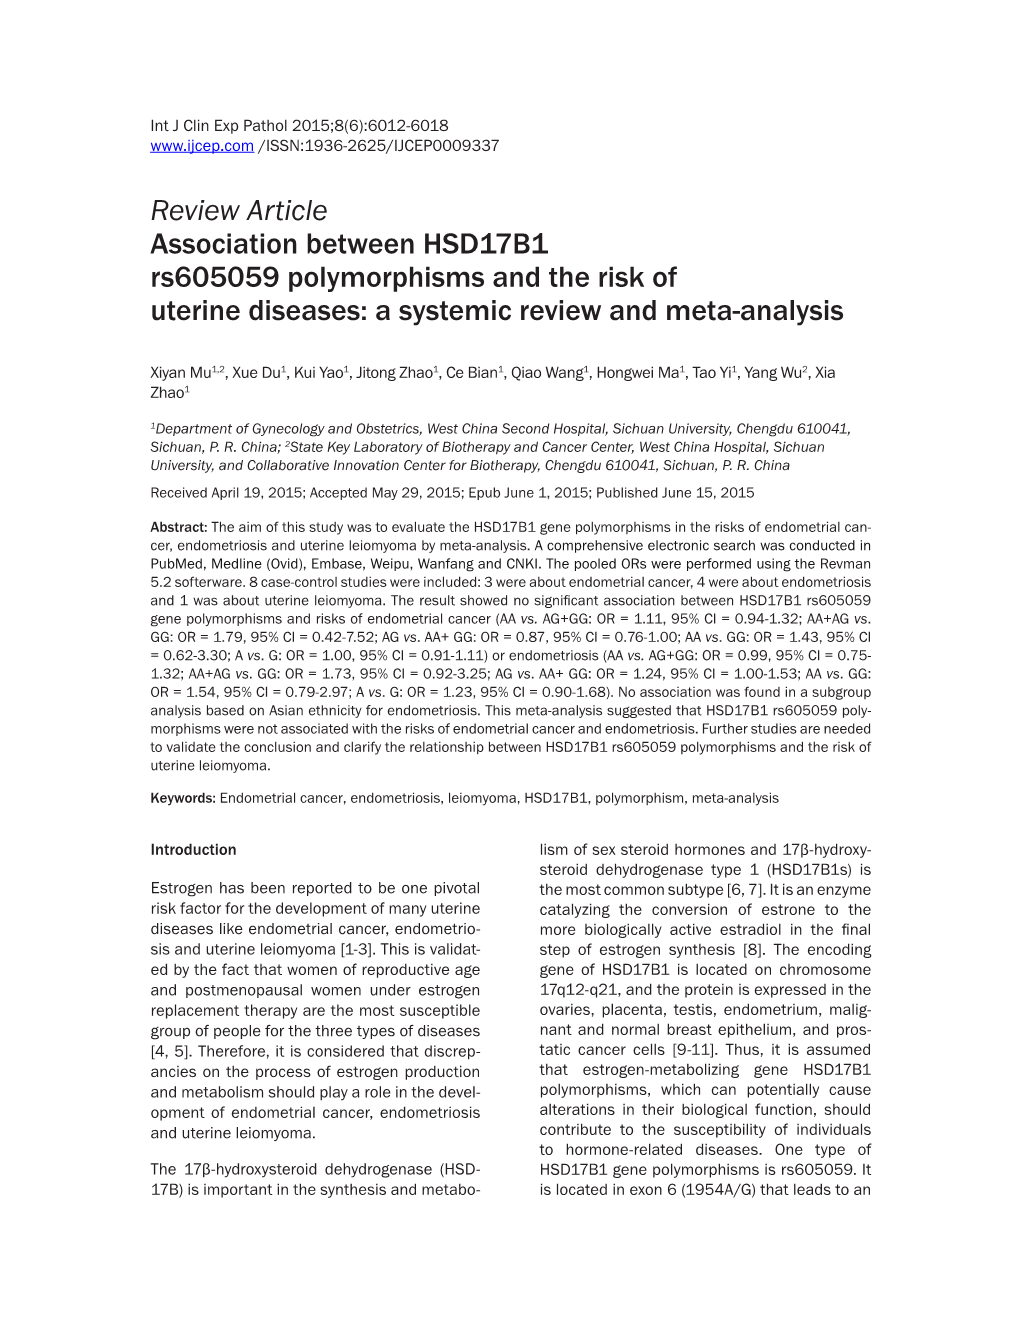 Review Article Association Between HSD17B1 Rs605059 Polymorphisms and the Risk of Uterine Diseases: a Systemic Review and Meta-Analysis